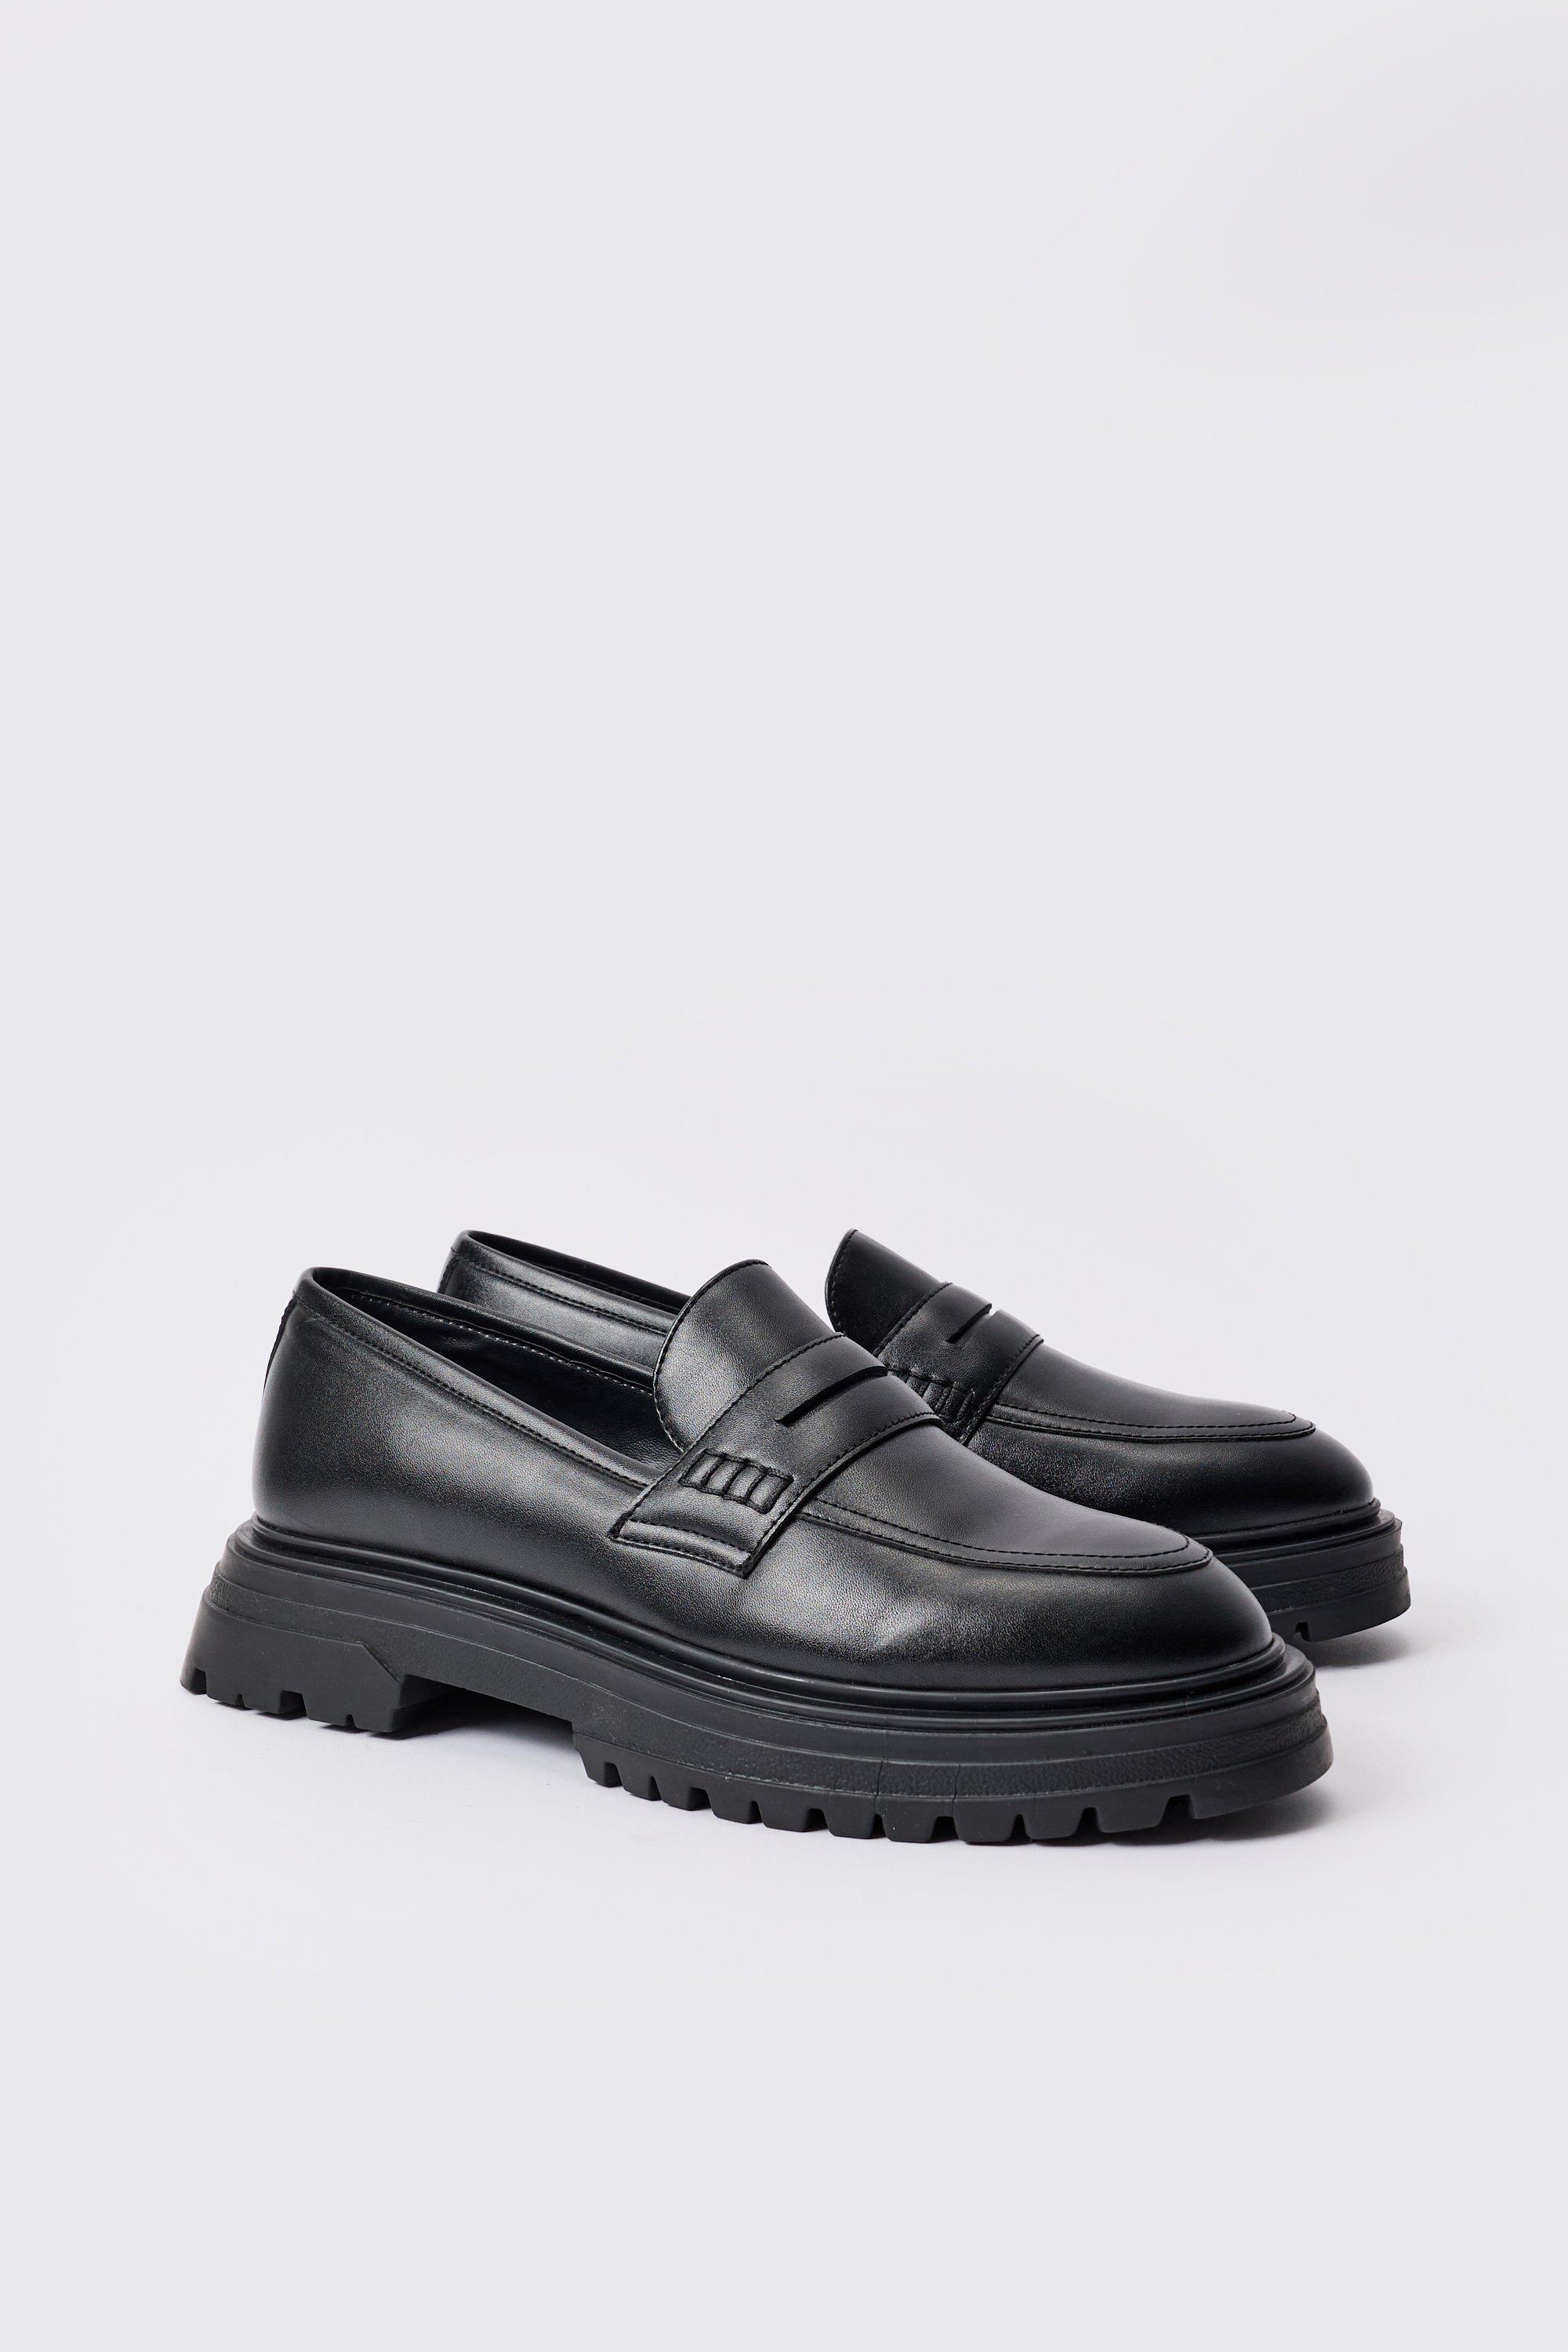 Image of Pu Slip On Chunky Loafer In Black, Nero